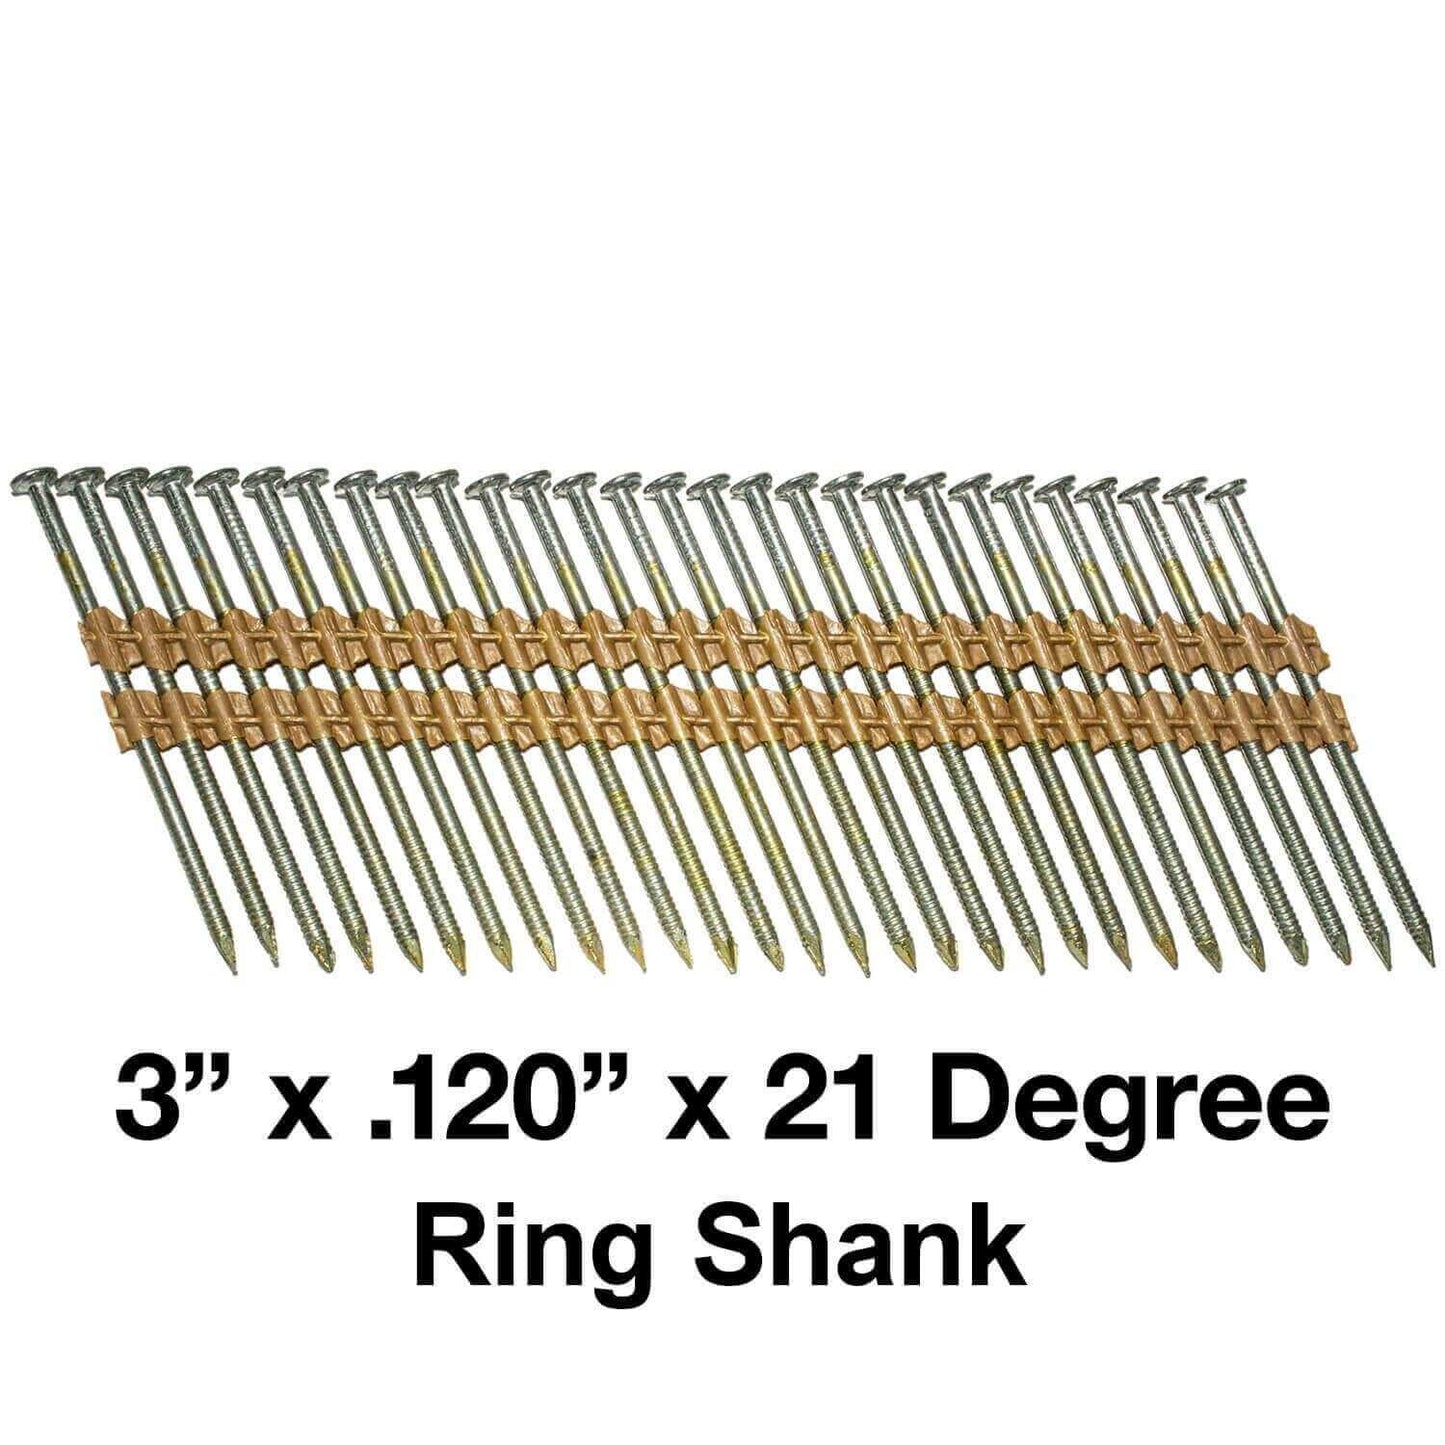 21 Degree Collated Nails - Vinyl coated framing nails in Smooth Shank and Ring Shank Galvanized.